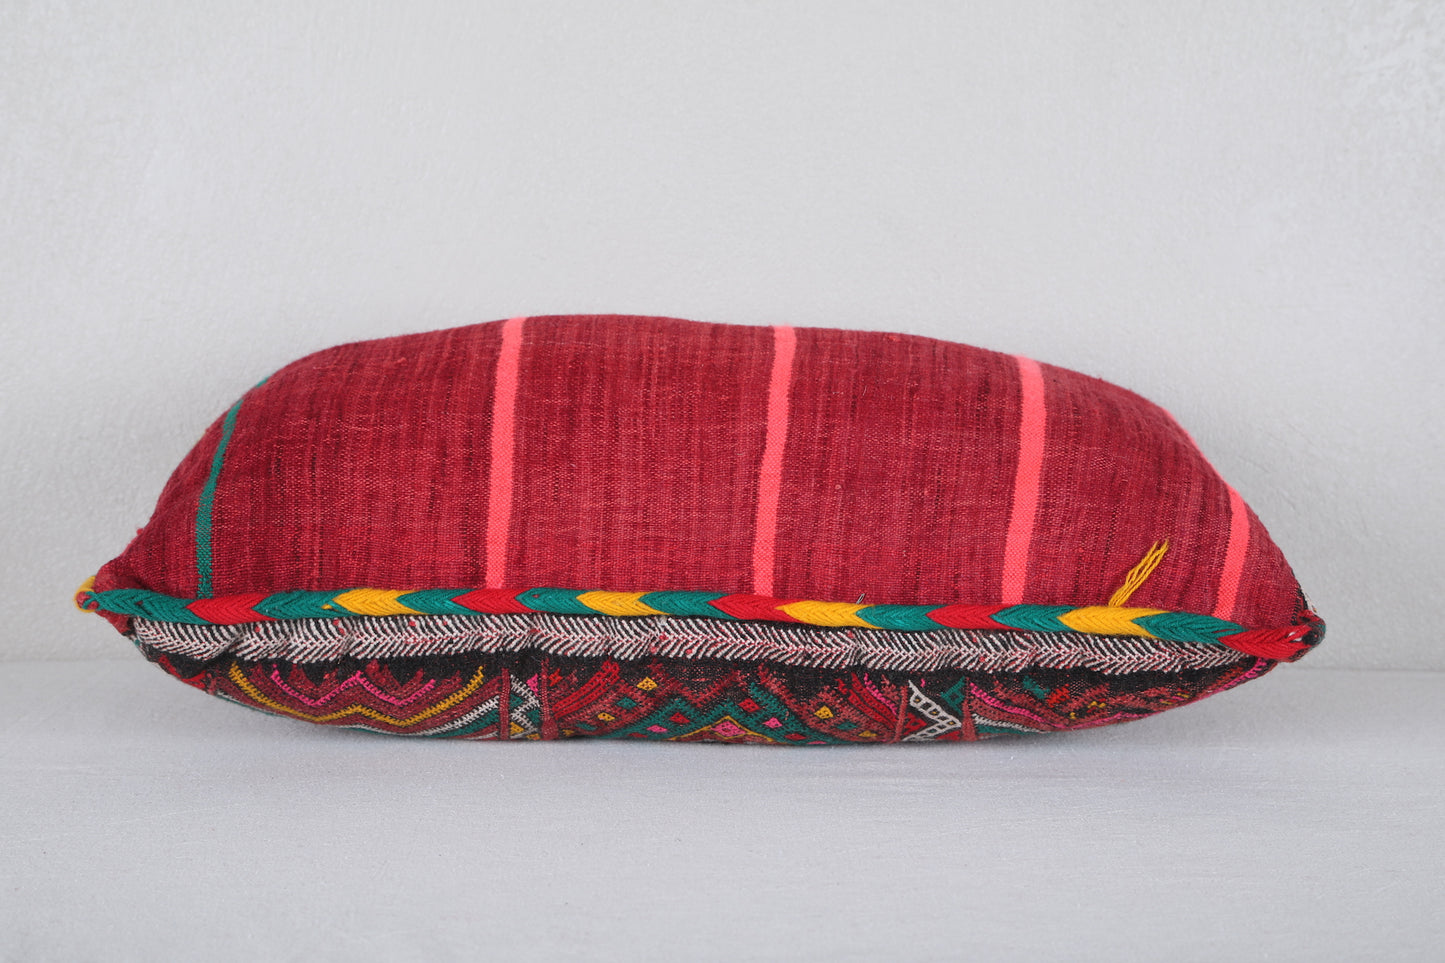 Vintage Moroccan pillow 14.9 INCHES X 24.4 INCHES